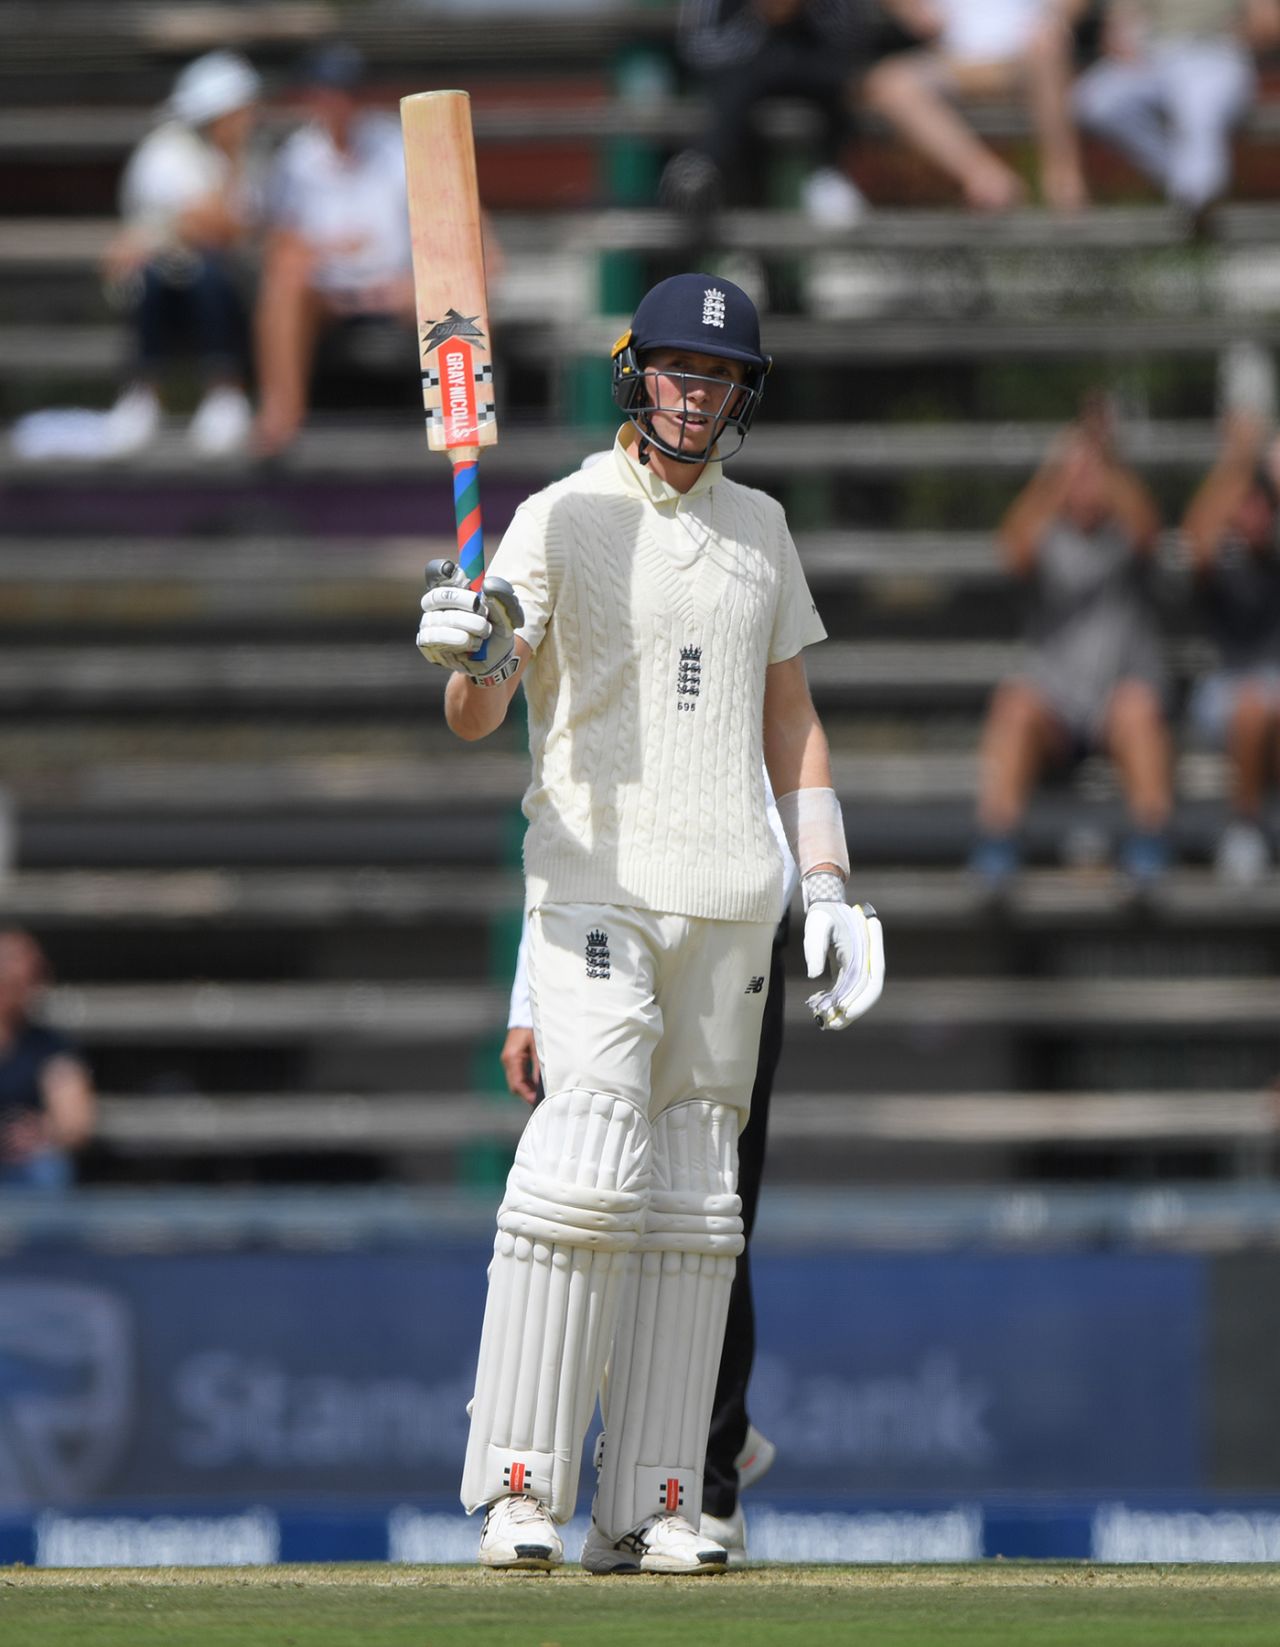 Zak Crawley made his maiden Test fifty, South Africa v England, 4th Test, Day 1, Johannesburg, January 24, 2020